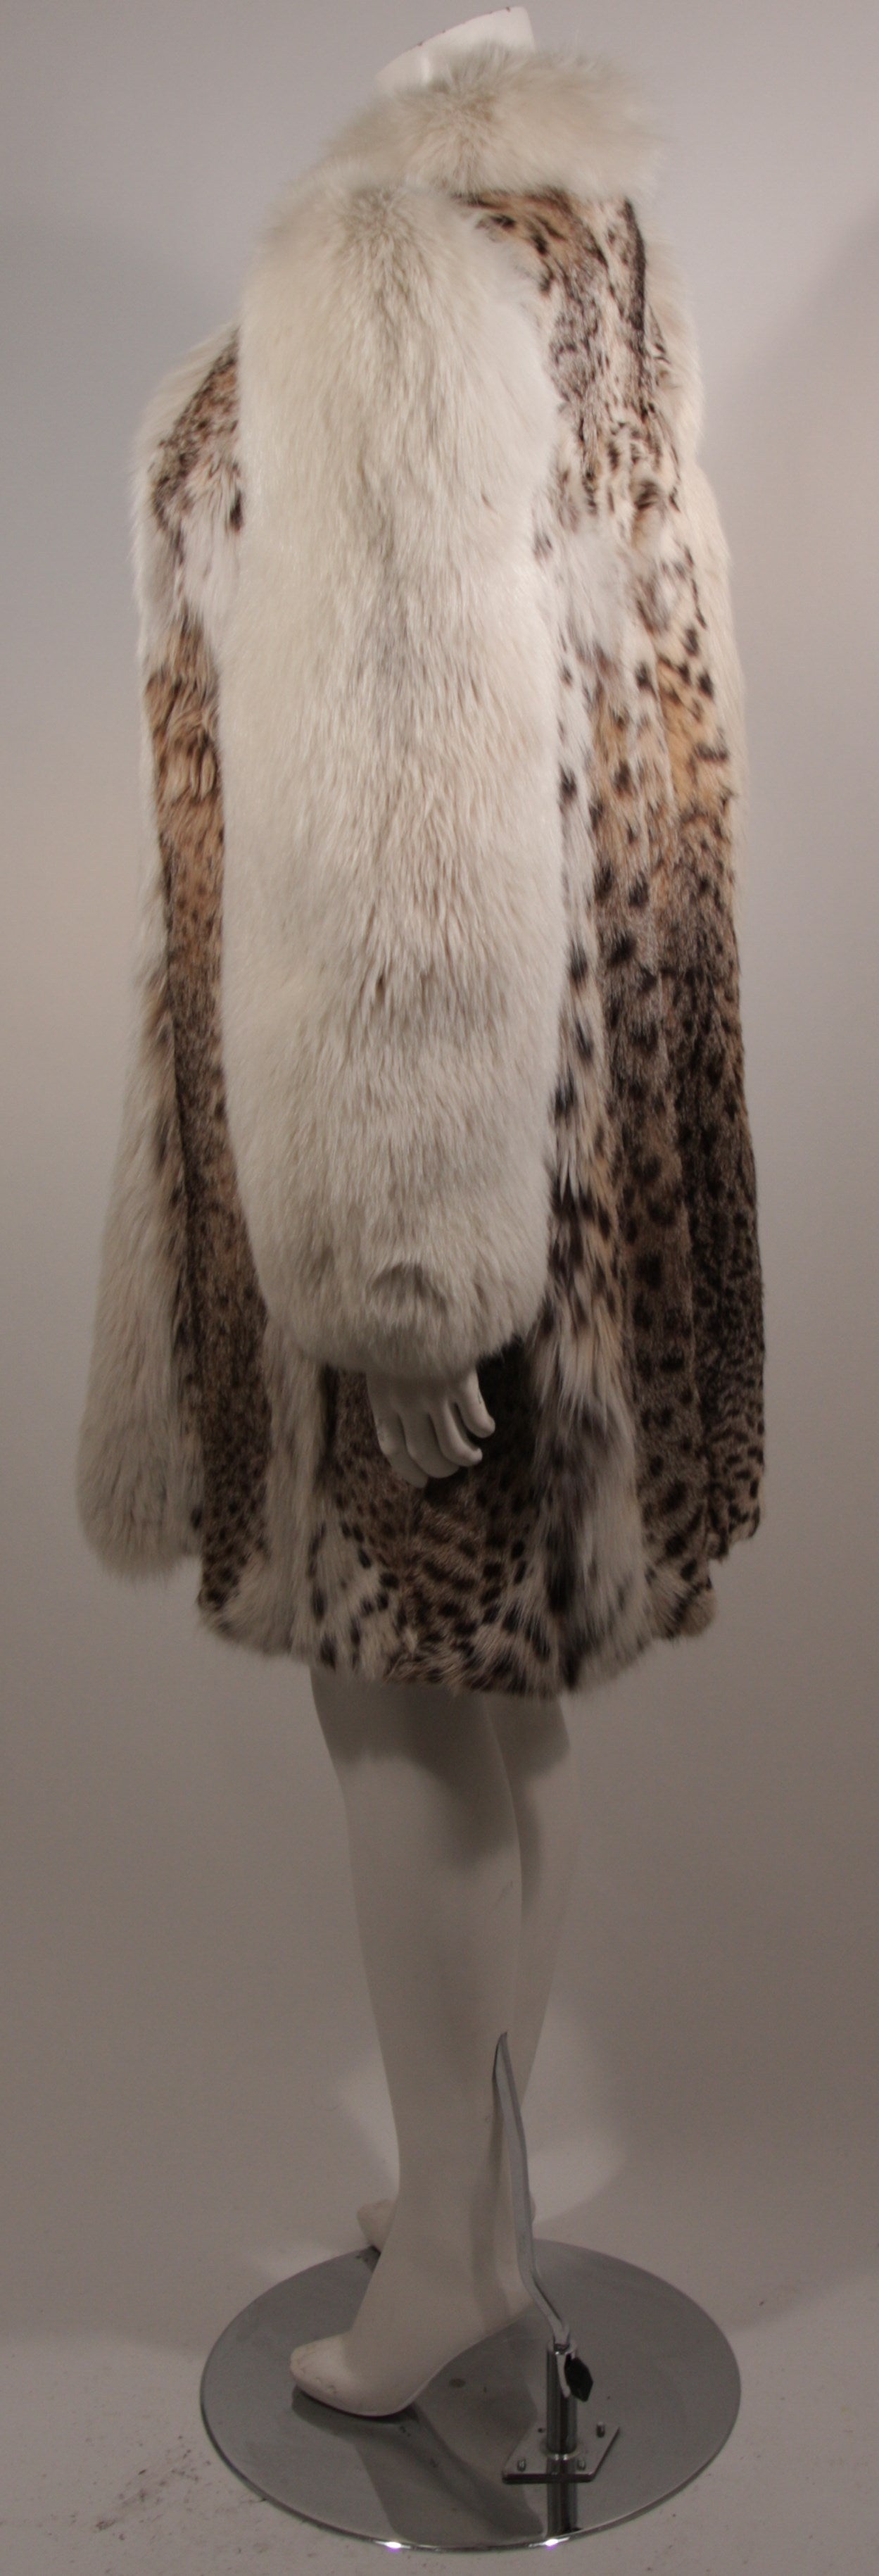 Beige Creeds Toronto Lynx Coat with Fox Fur Collar and Sleeves